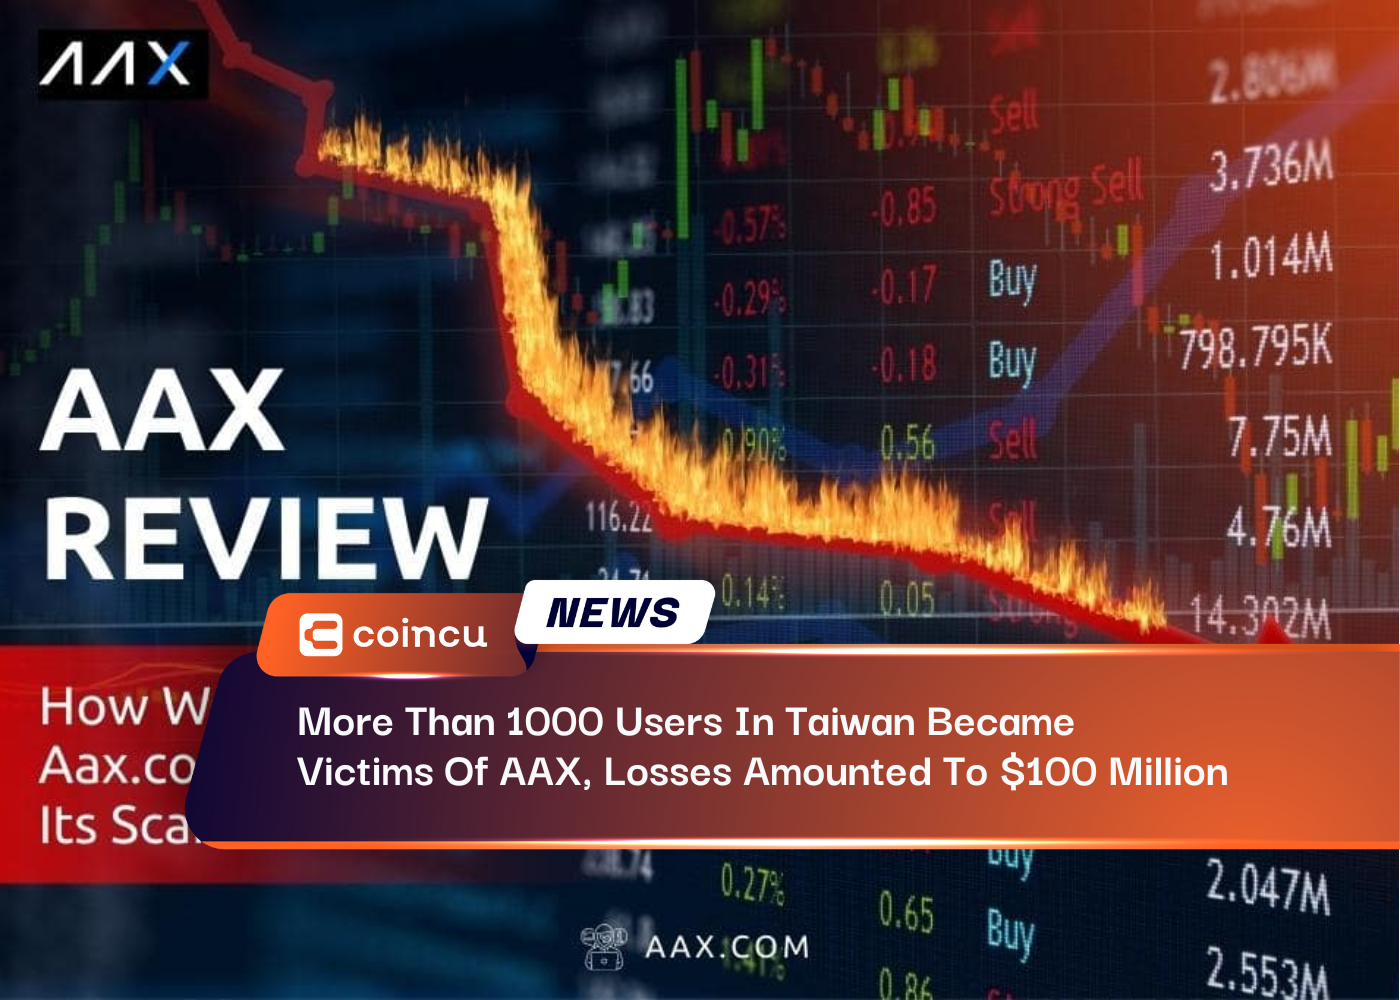 More Than 1000 Users In Taiwan Became Victims Of AAX, Losses Amounted To $100 Million